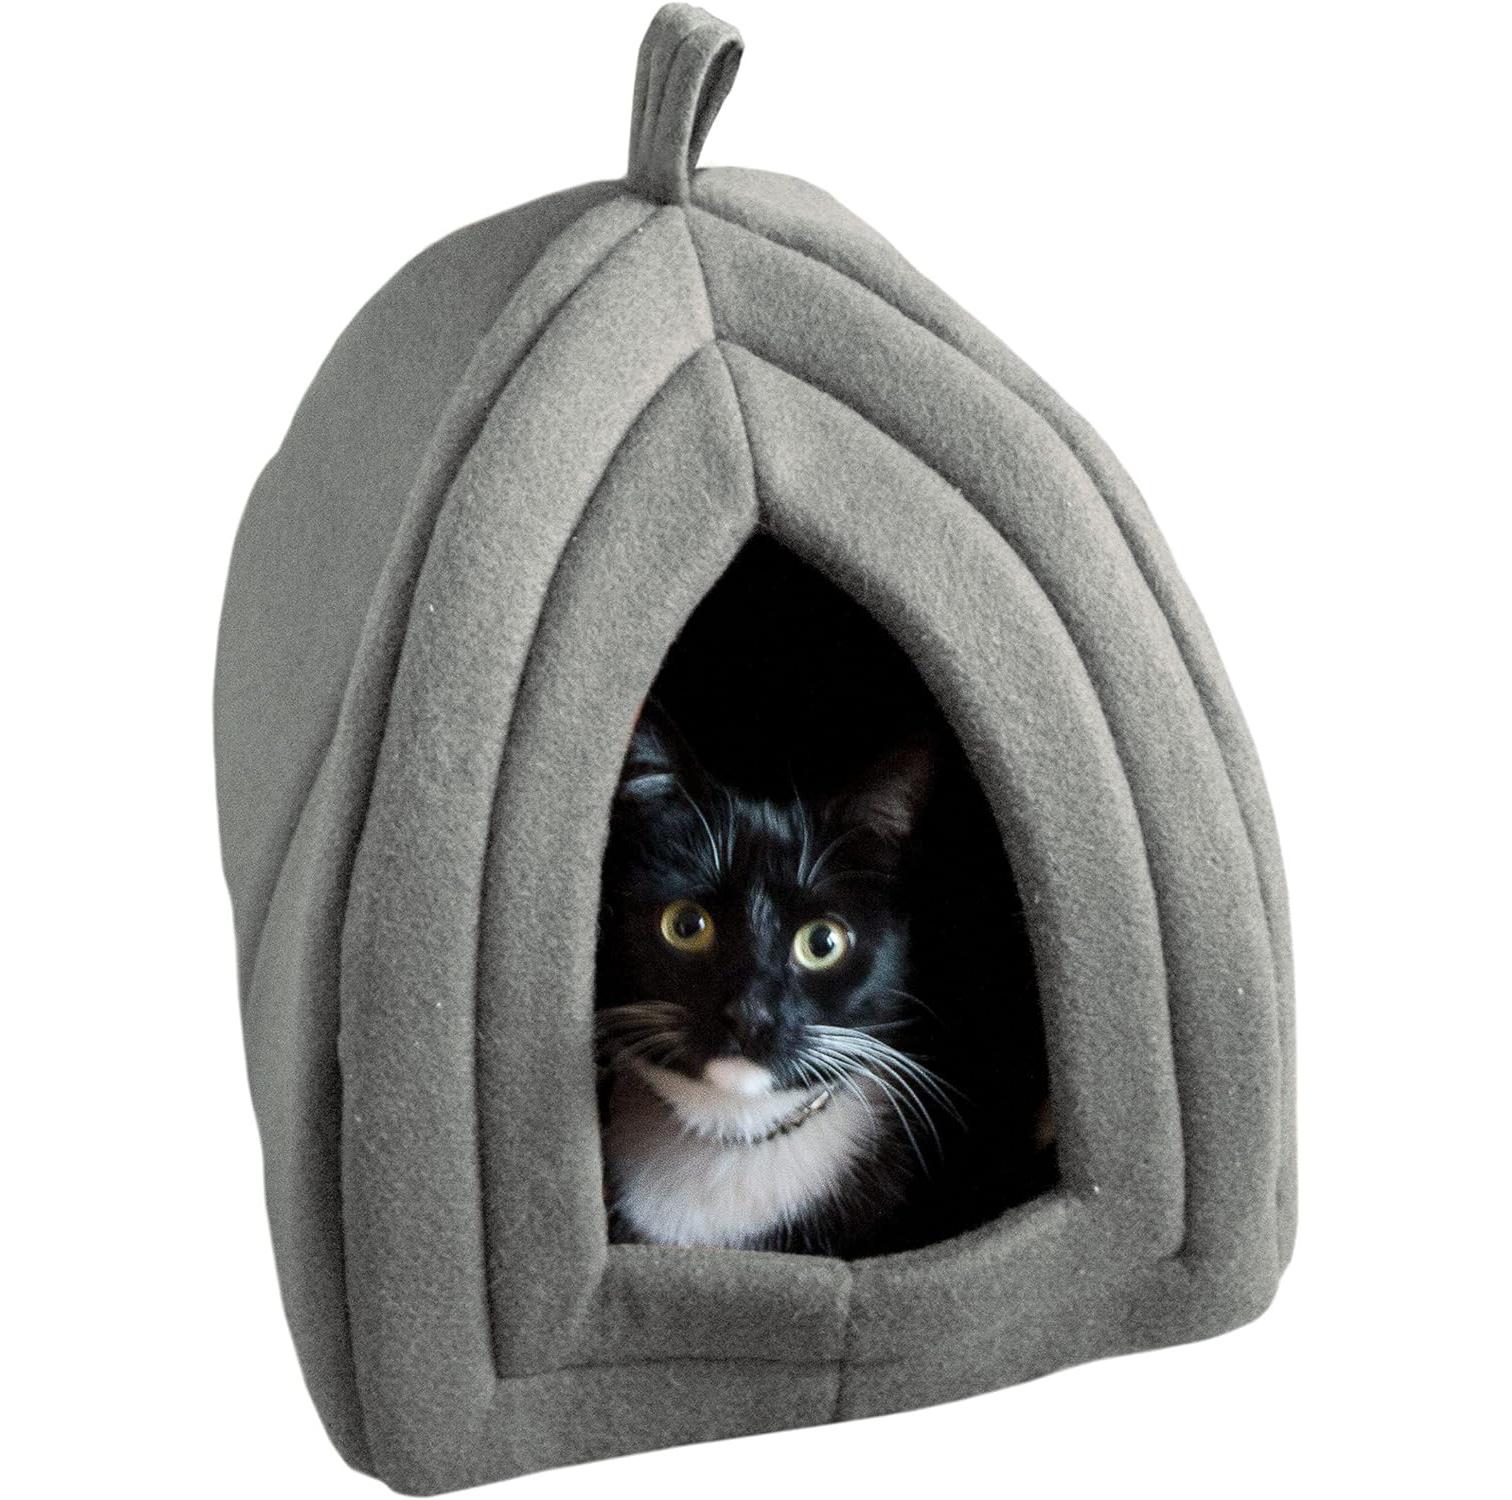 Cat House Indoor Bed with Removable Foam Cushion Pet Tent for $7.52